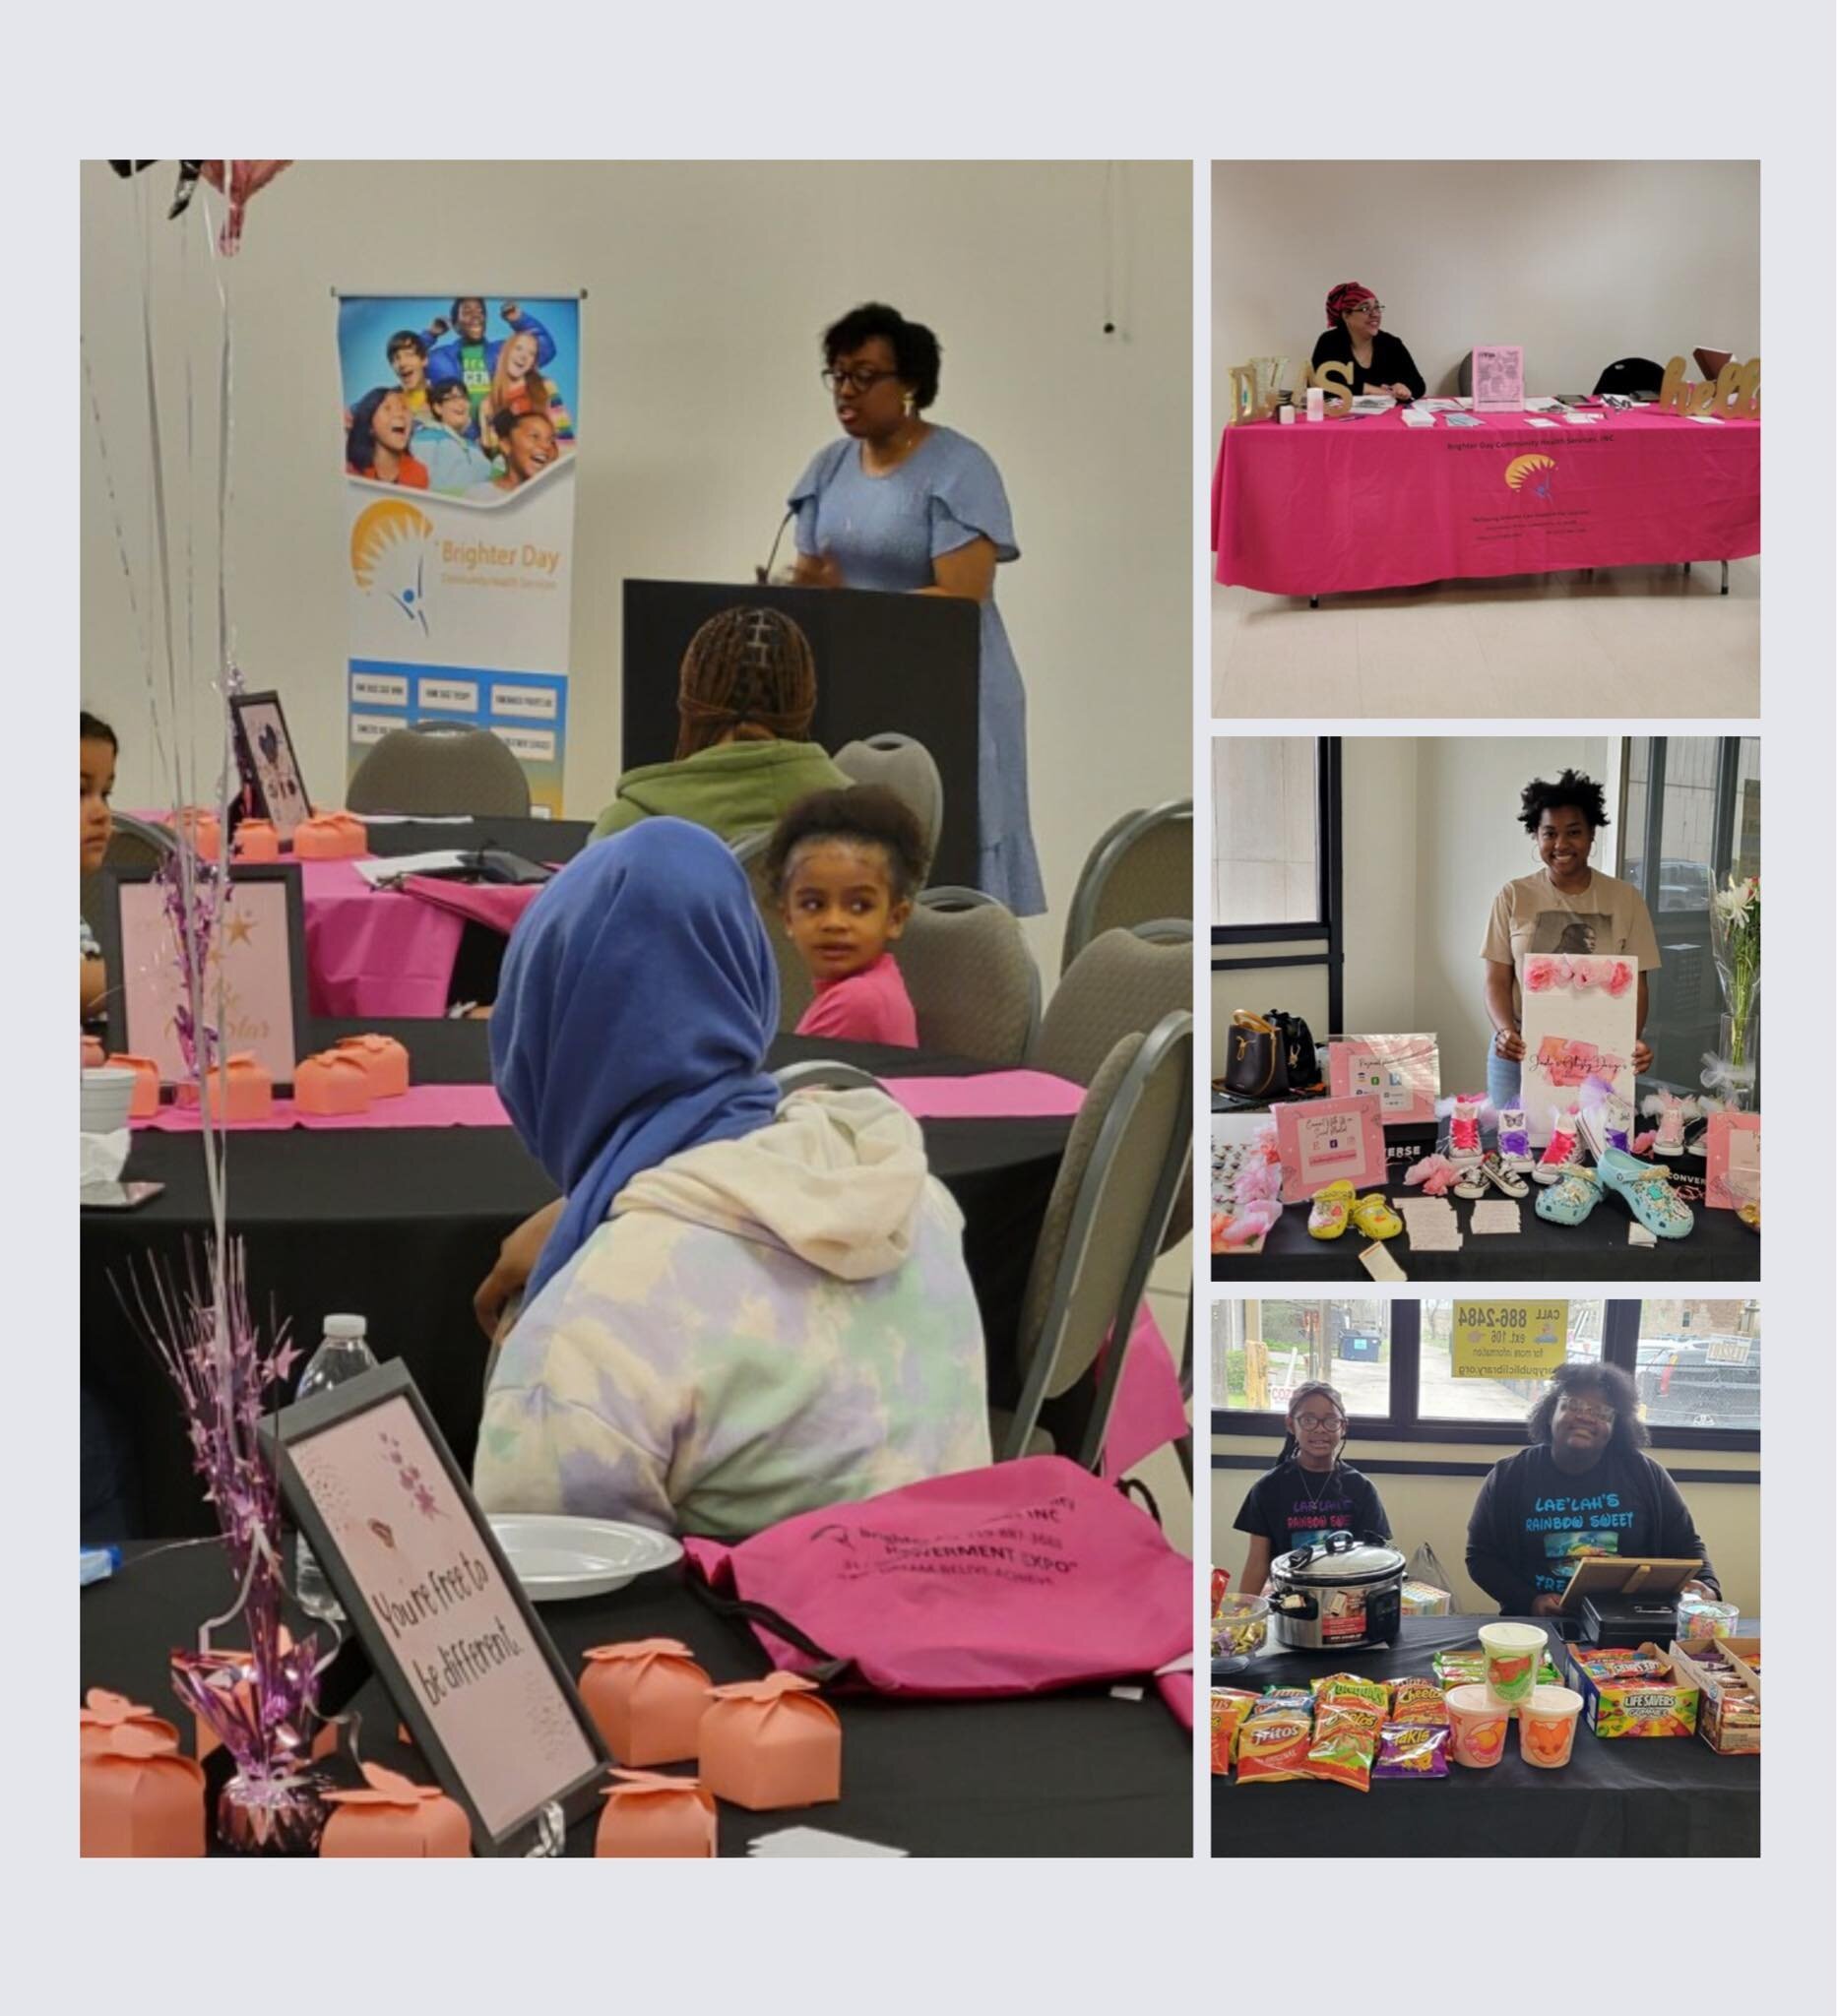 Kudos to everyone who helped make this vision a success! Our 1at Annual Young Ladies Empowerment Expo was amazing! Thanks to Elect for Congress Jennifer Ruth Green who inspired the young ladies with positivity.  There were many other presenters and v